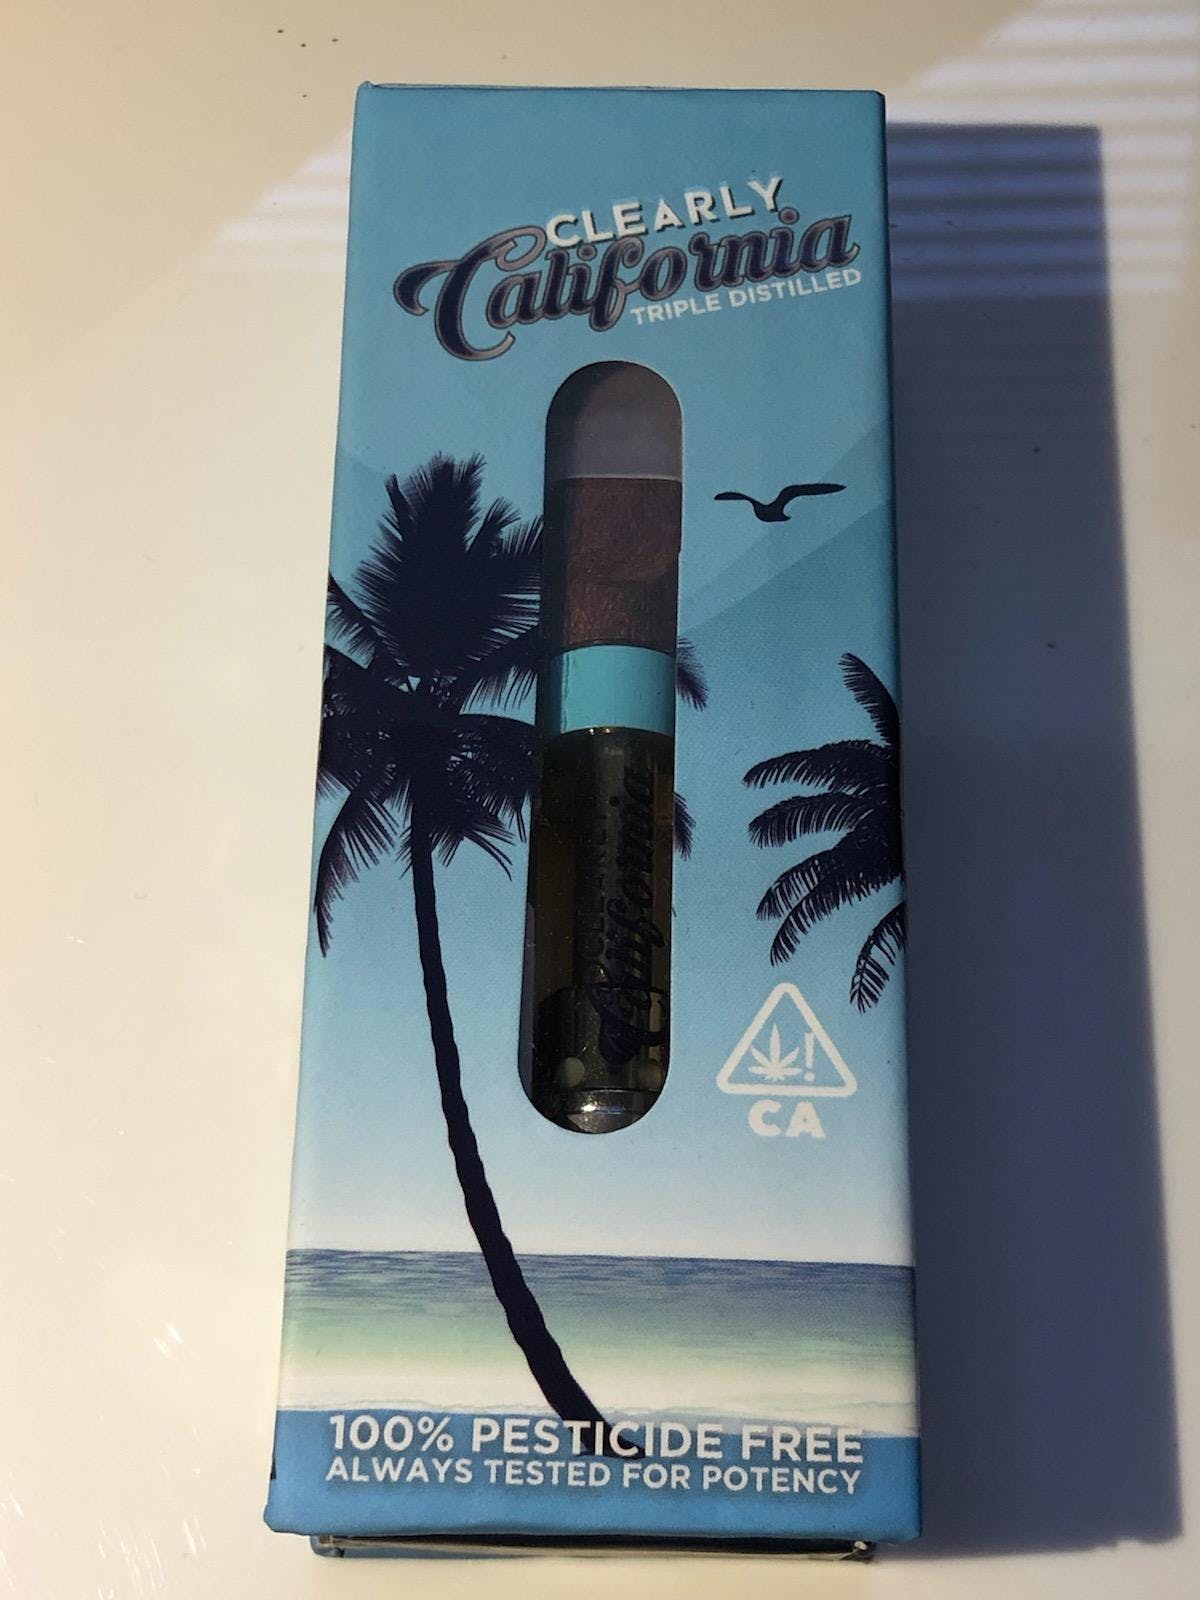 marijuana-dispensaries-by-appointment-only-2c-call-to-verify-fresno-clearly-california-strawberry-banana-goo